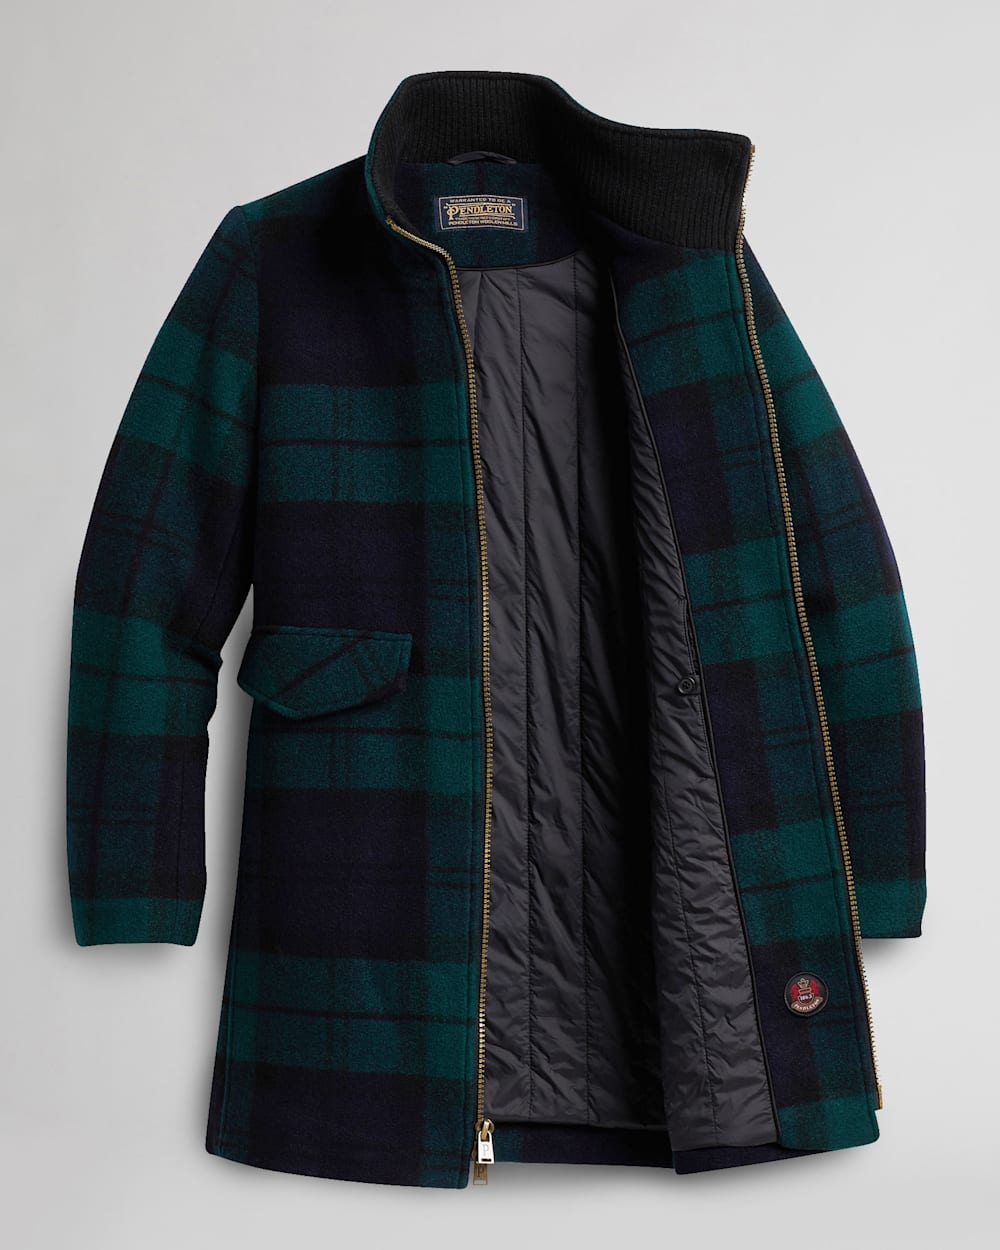 ALTERNATE VIEW OF WOMEN'S CAMDEN TOPPER COAT IN BLACK WATCH PLAID image number 6